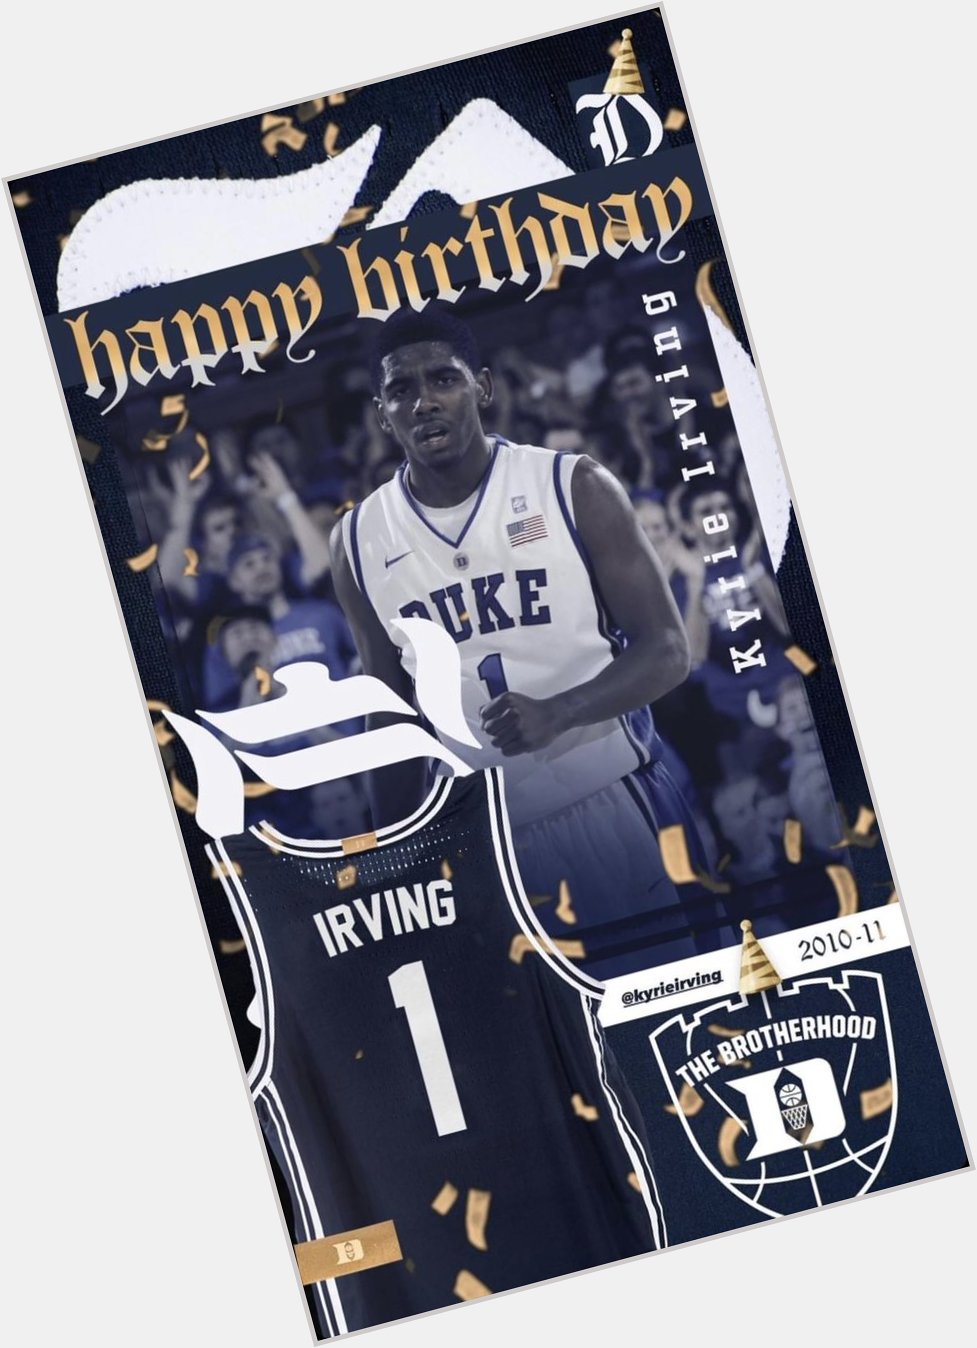 Happy Birthday to former    Kyrie Irving   